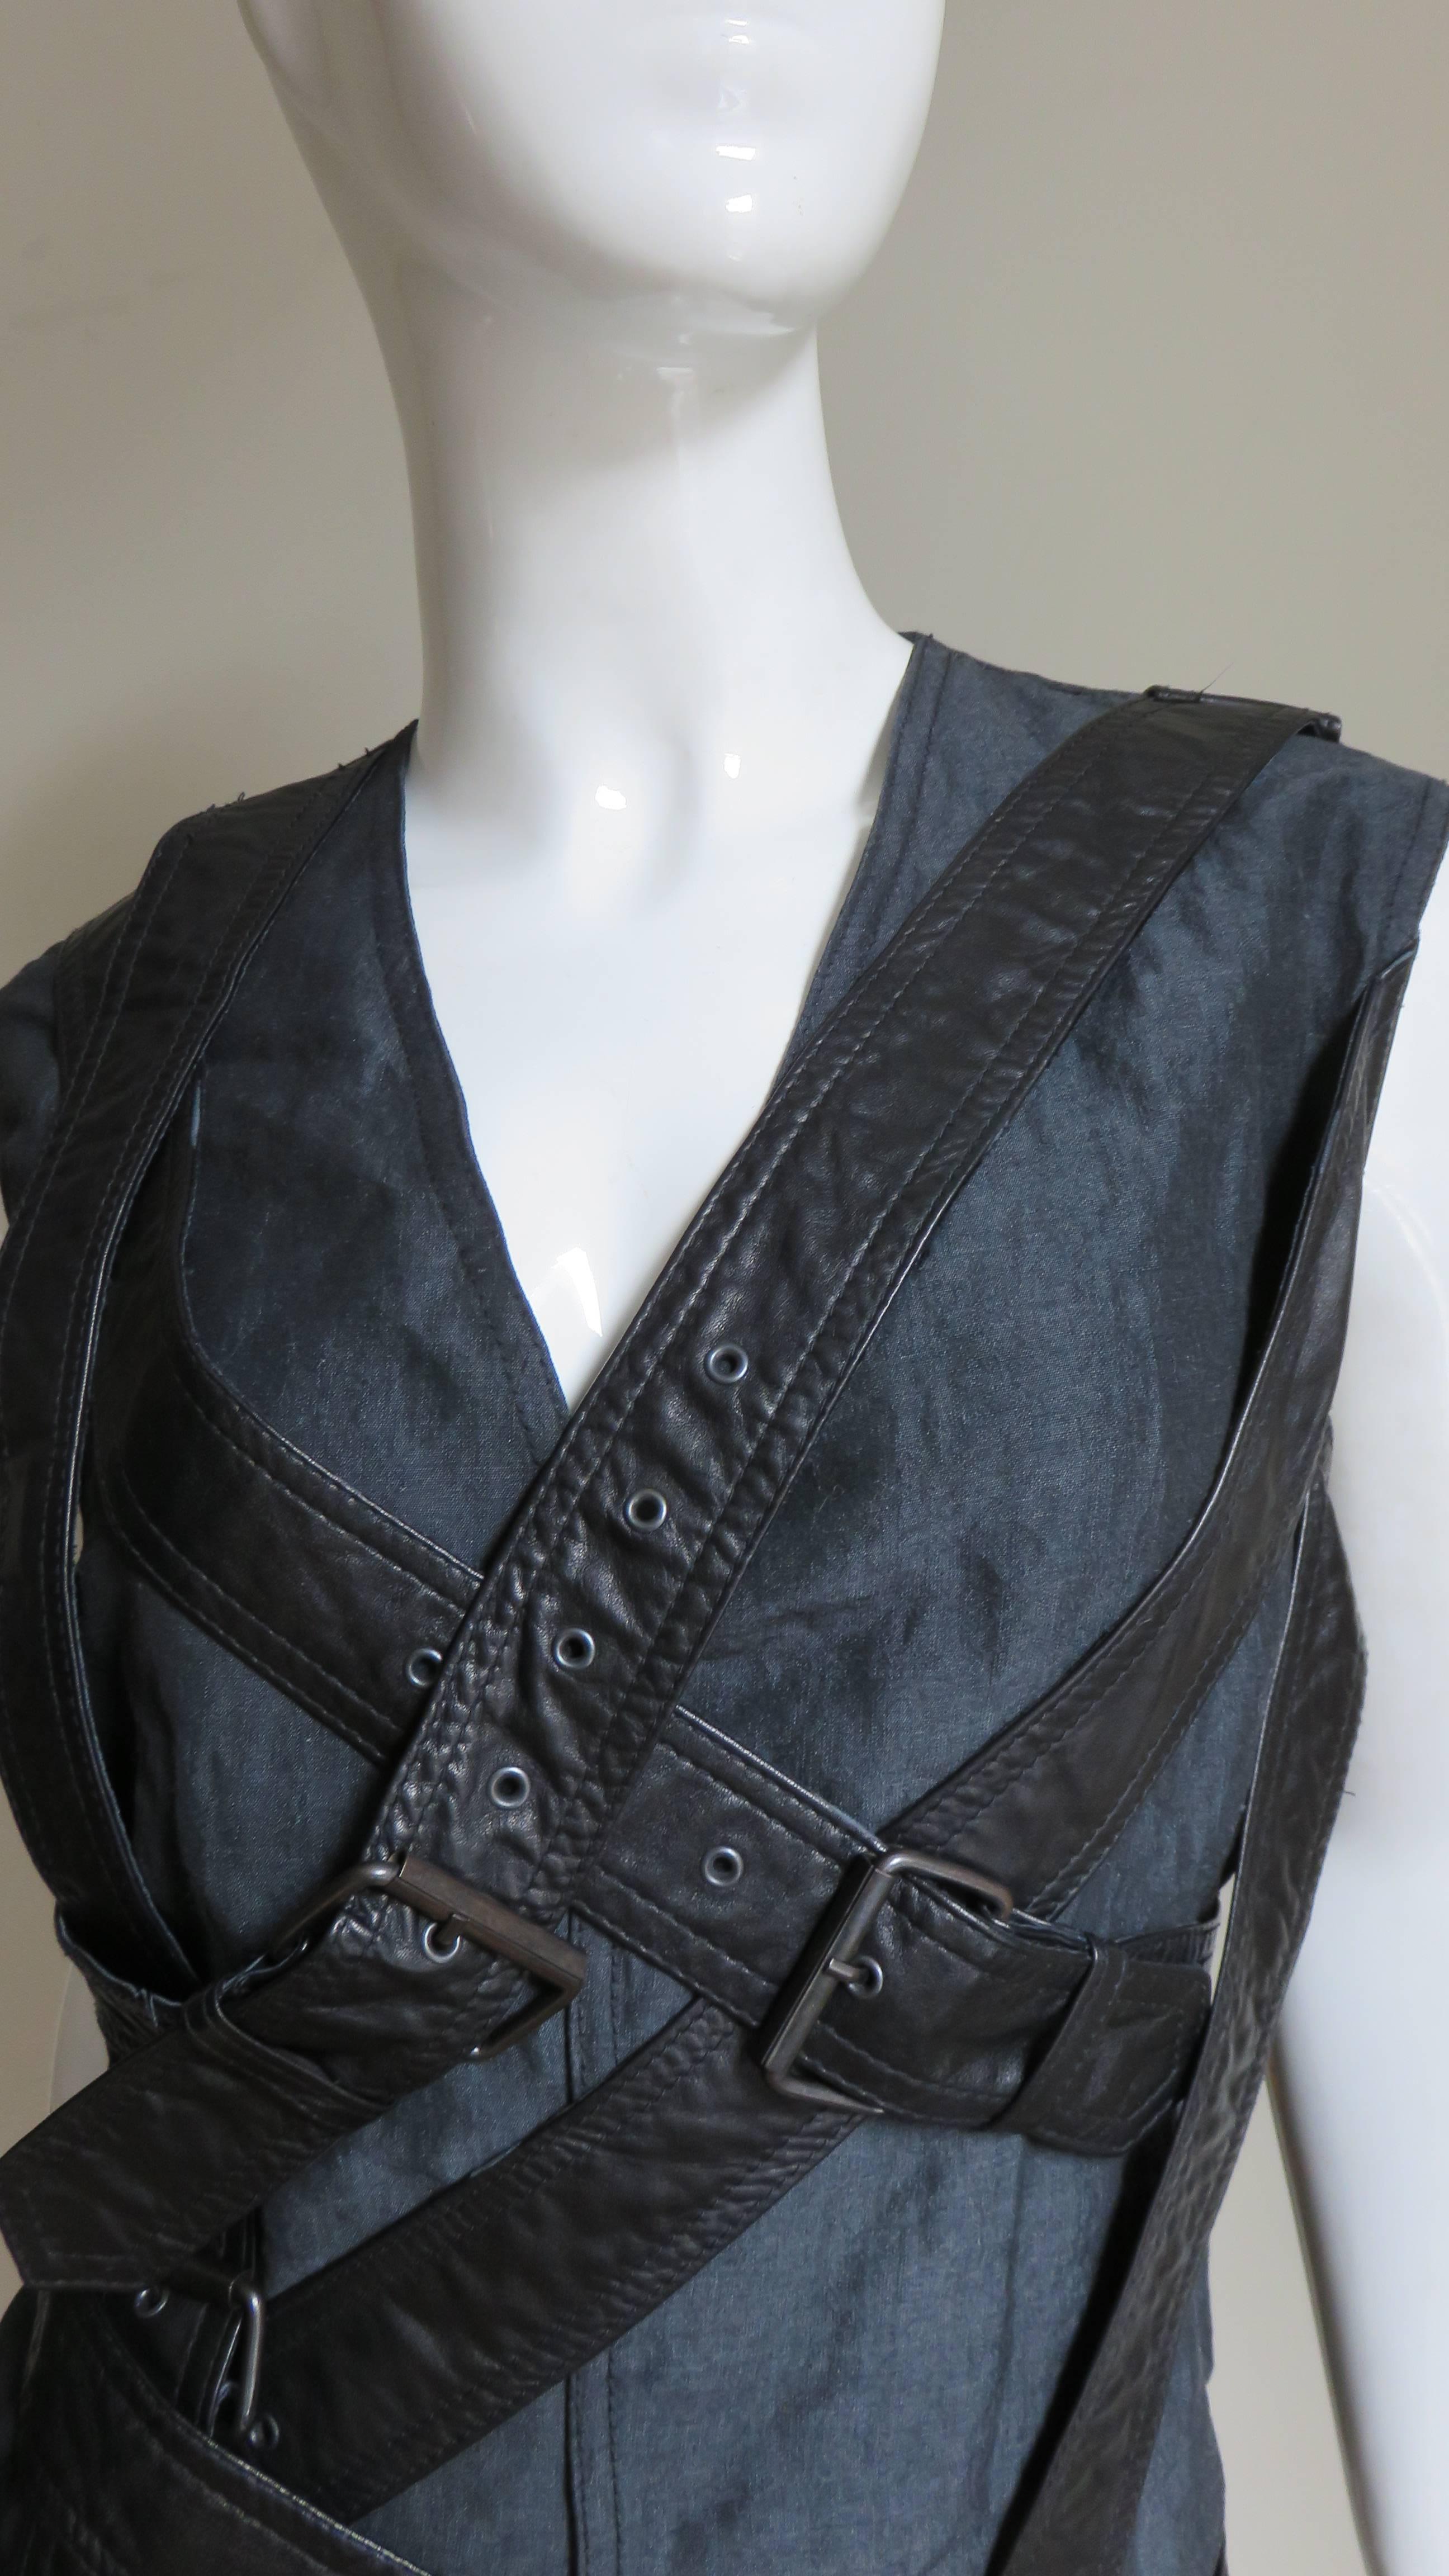 A fabulous black sleeveless jacket, vest, top attributed to Givenchy.  It is simple wrapping in front and completely adorned in functional, adjustable n PVC straps with buckles placed intermittently at various angles crossing the front and back.  It